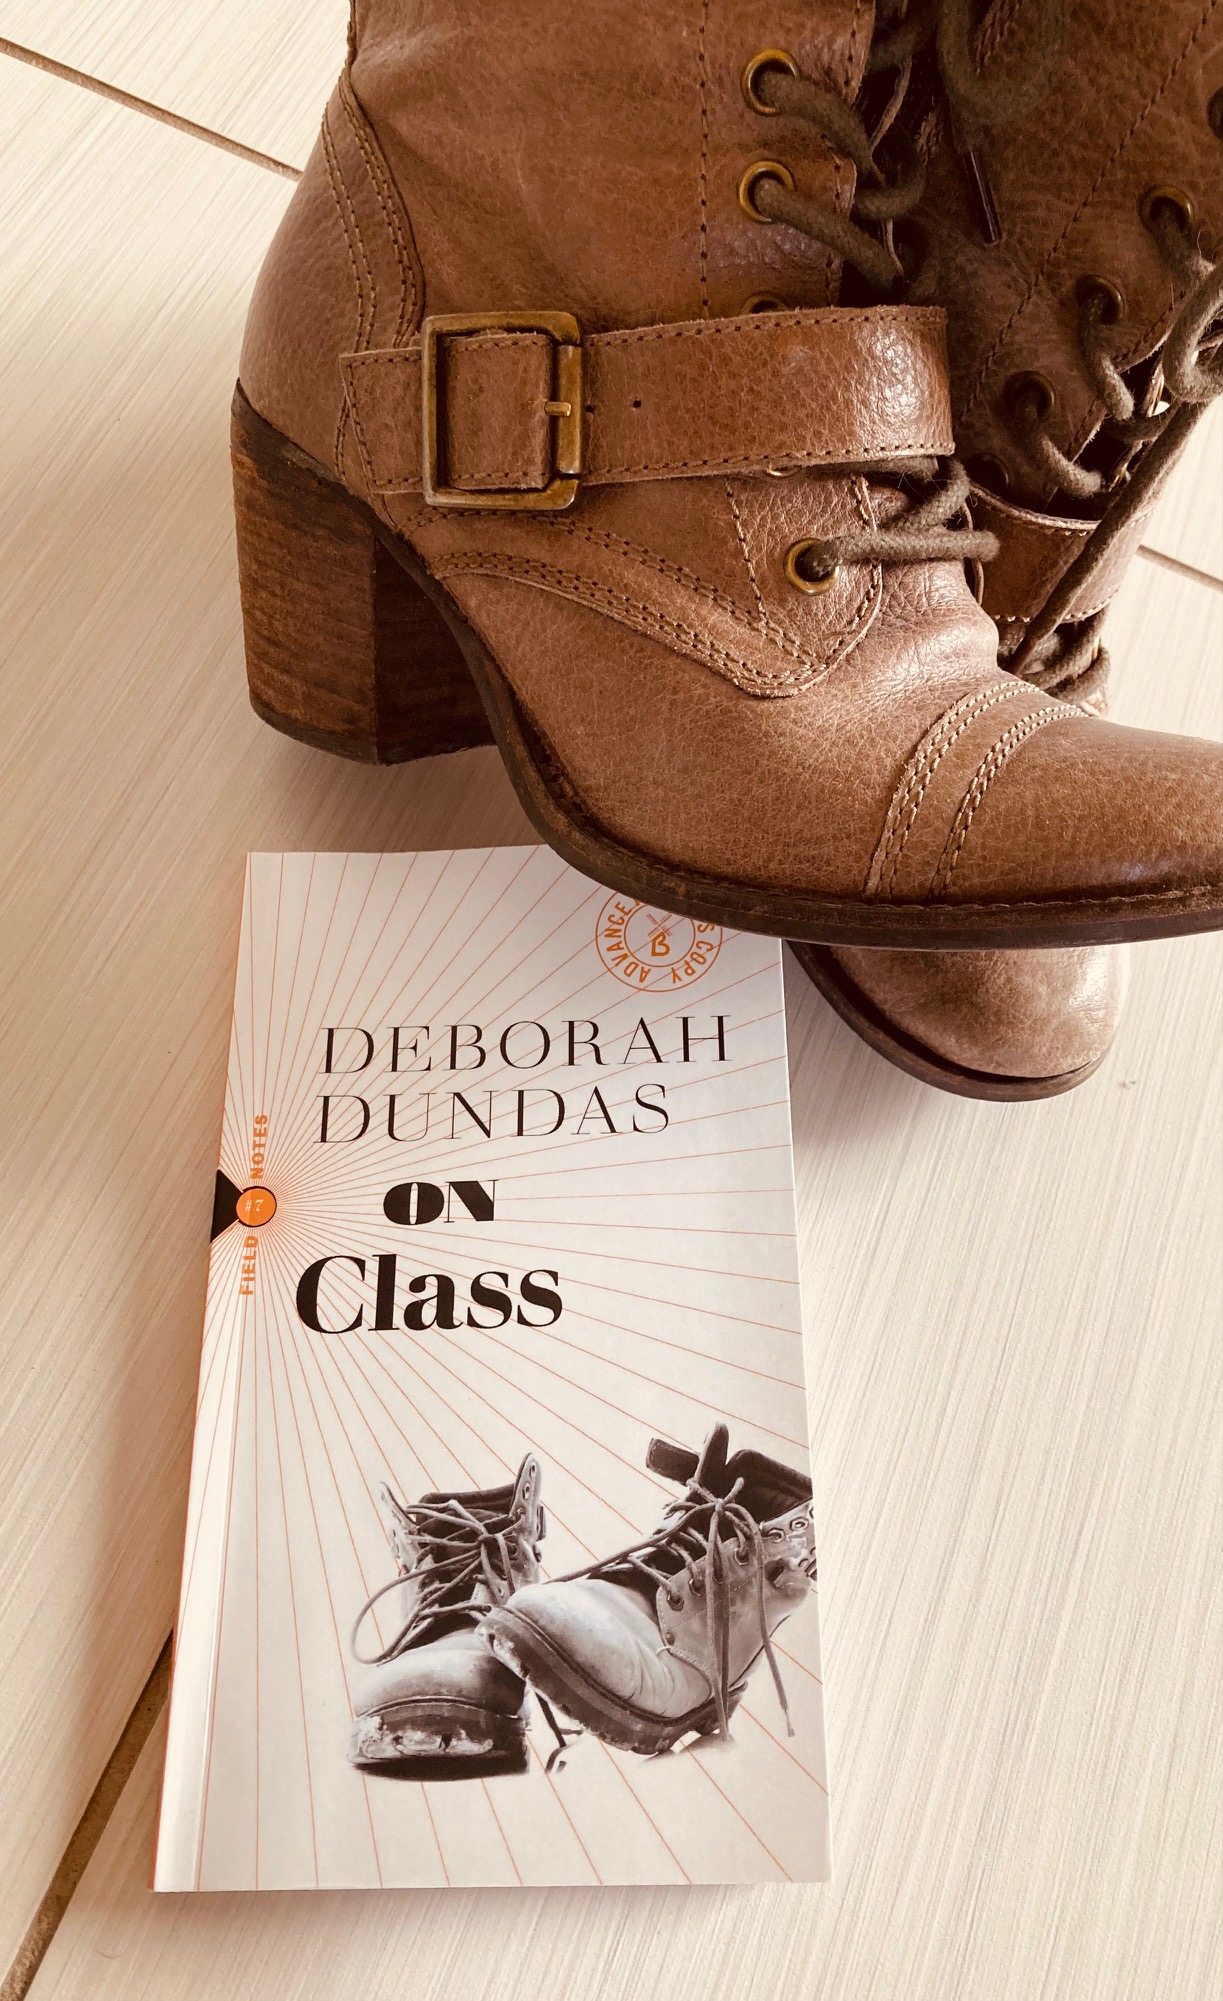 On Class by Deborah Dundas book pictured beside two brown boots